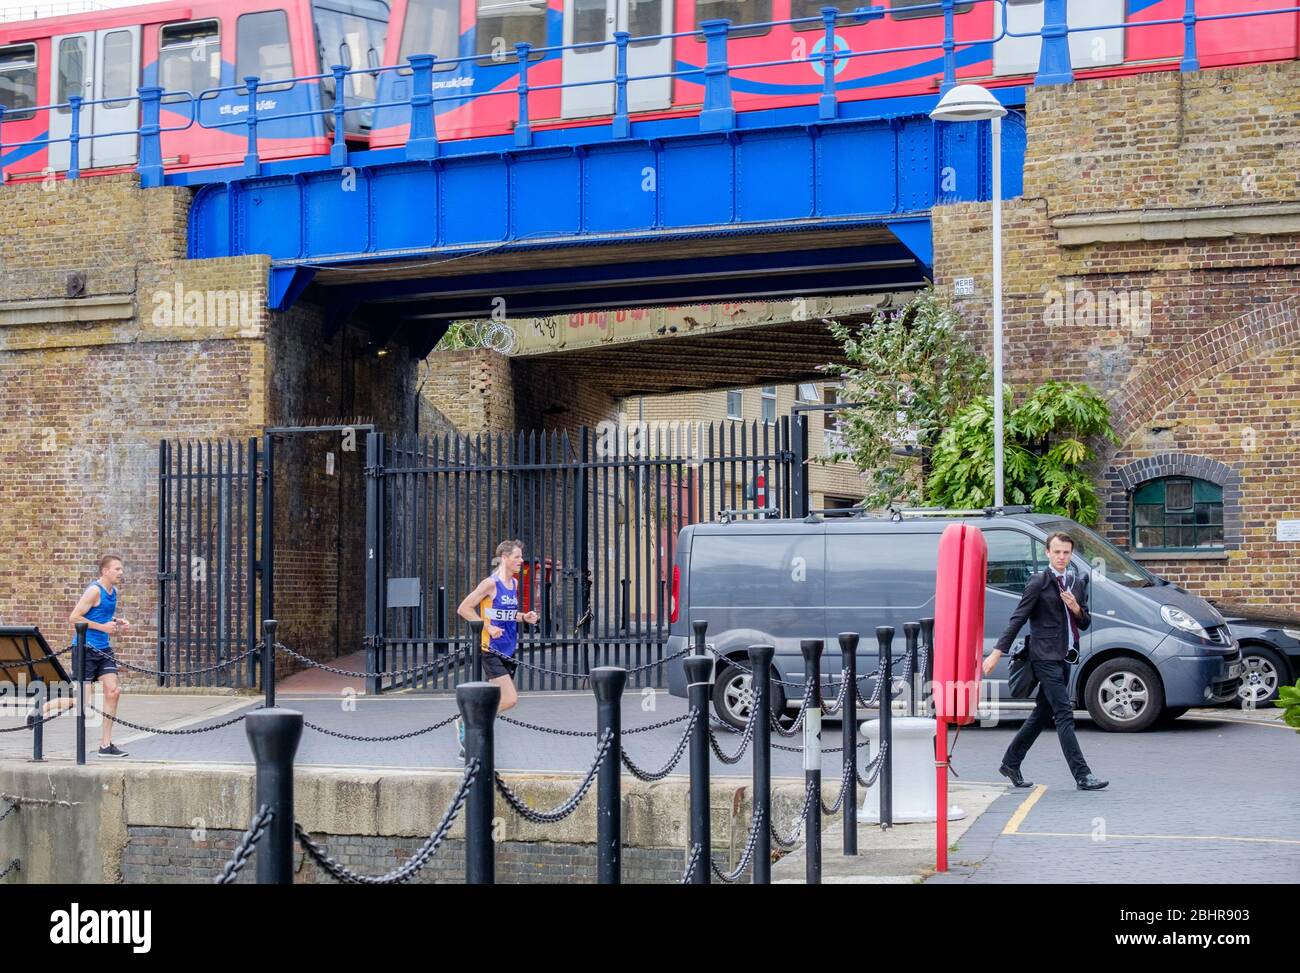 Two men jog, one man walking with suit & tie & headphones. DLR passing on bridge in background at Limehouse Marina, Tower  Hamlets, East London, UK. Stock Photo